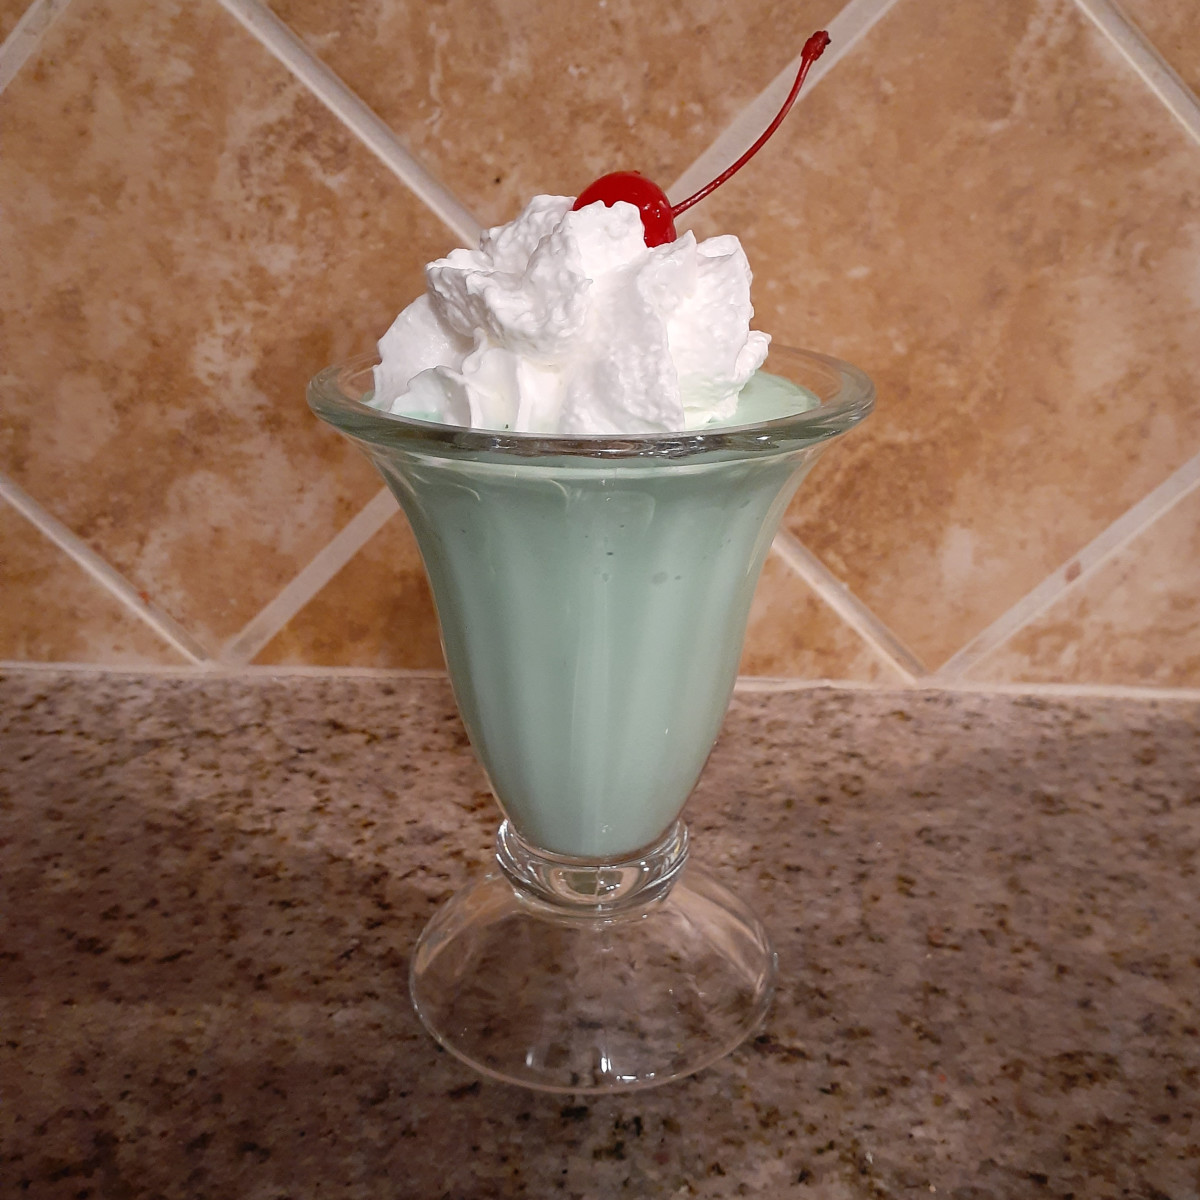 One of our favorite end-of-winter treats is a Shamrock Shake from McDonald's. 